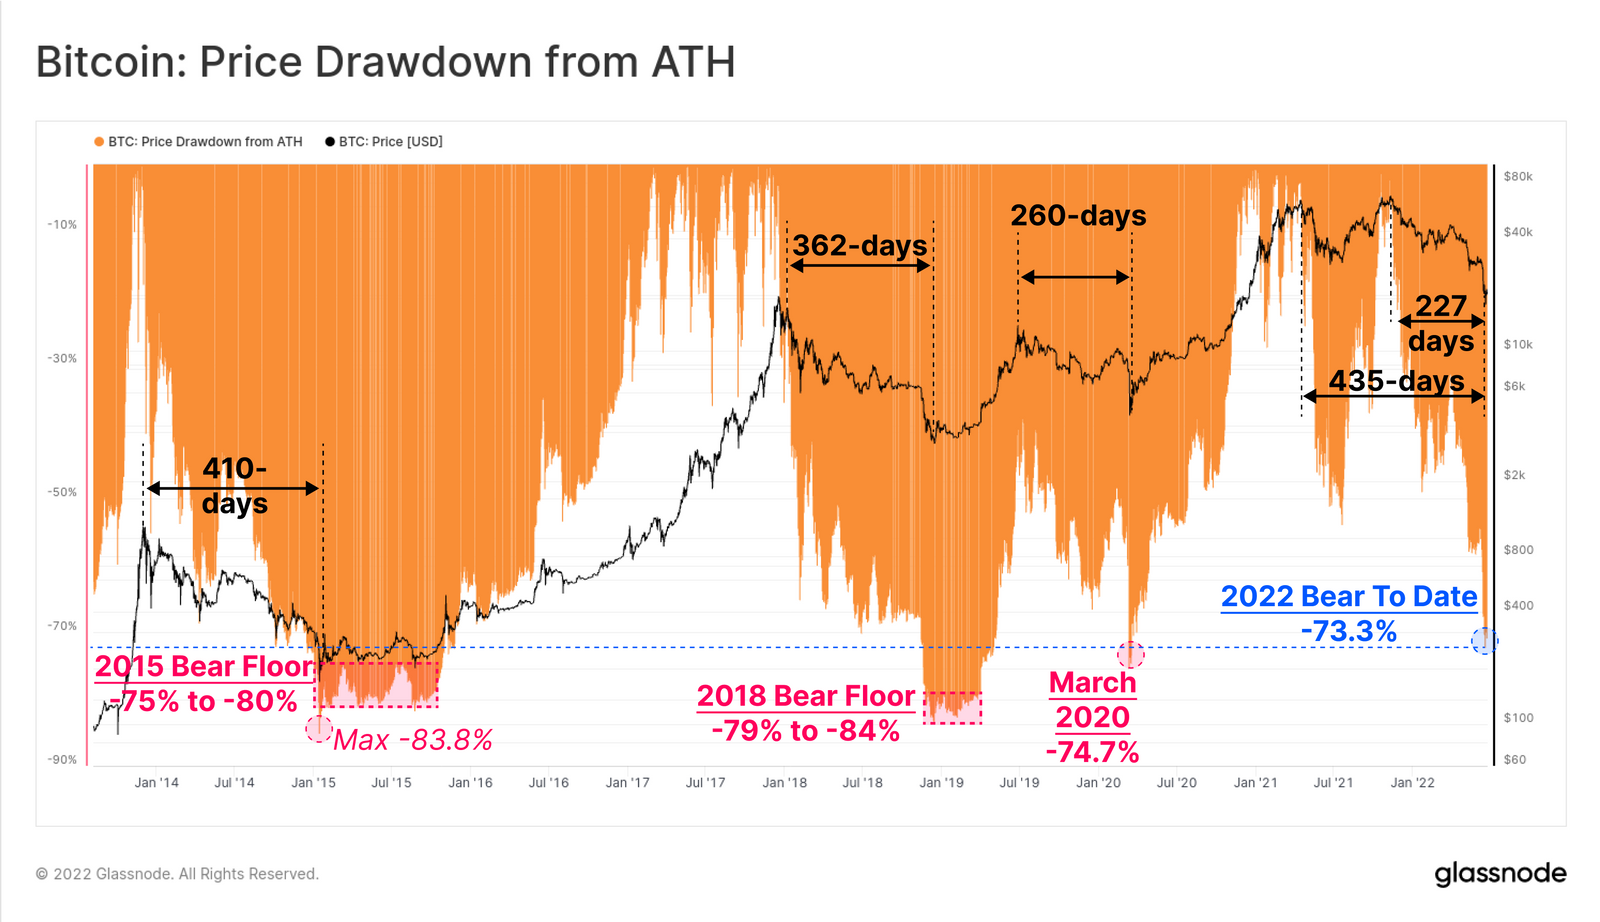 BTC price drawdown in % from its ATH